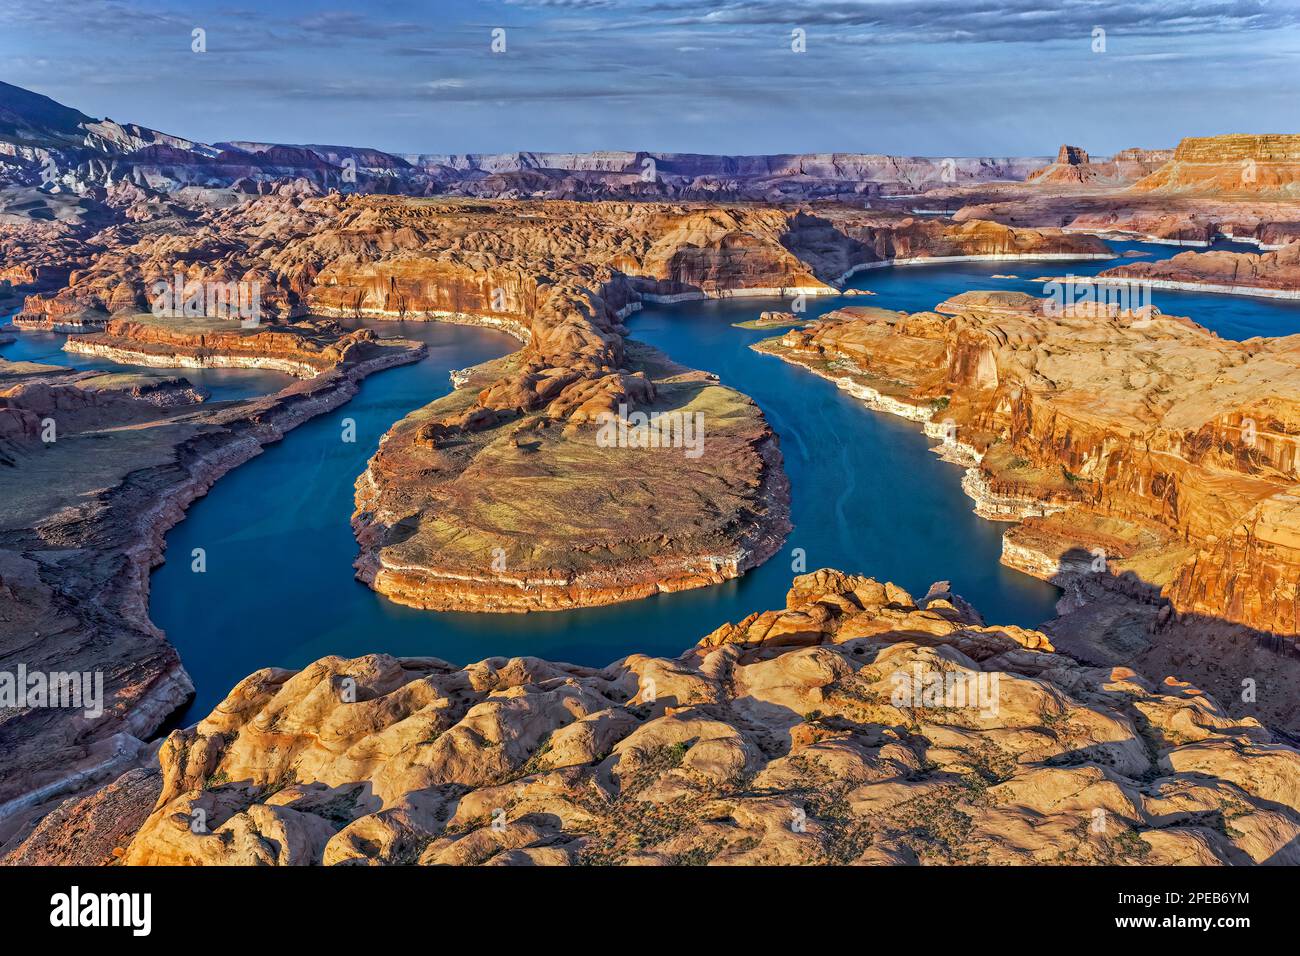 Meandering Waters of Glen Canyon - Lake Powell Stock Photo